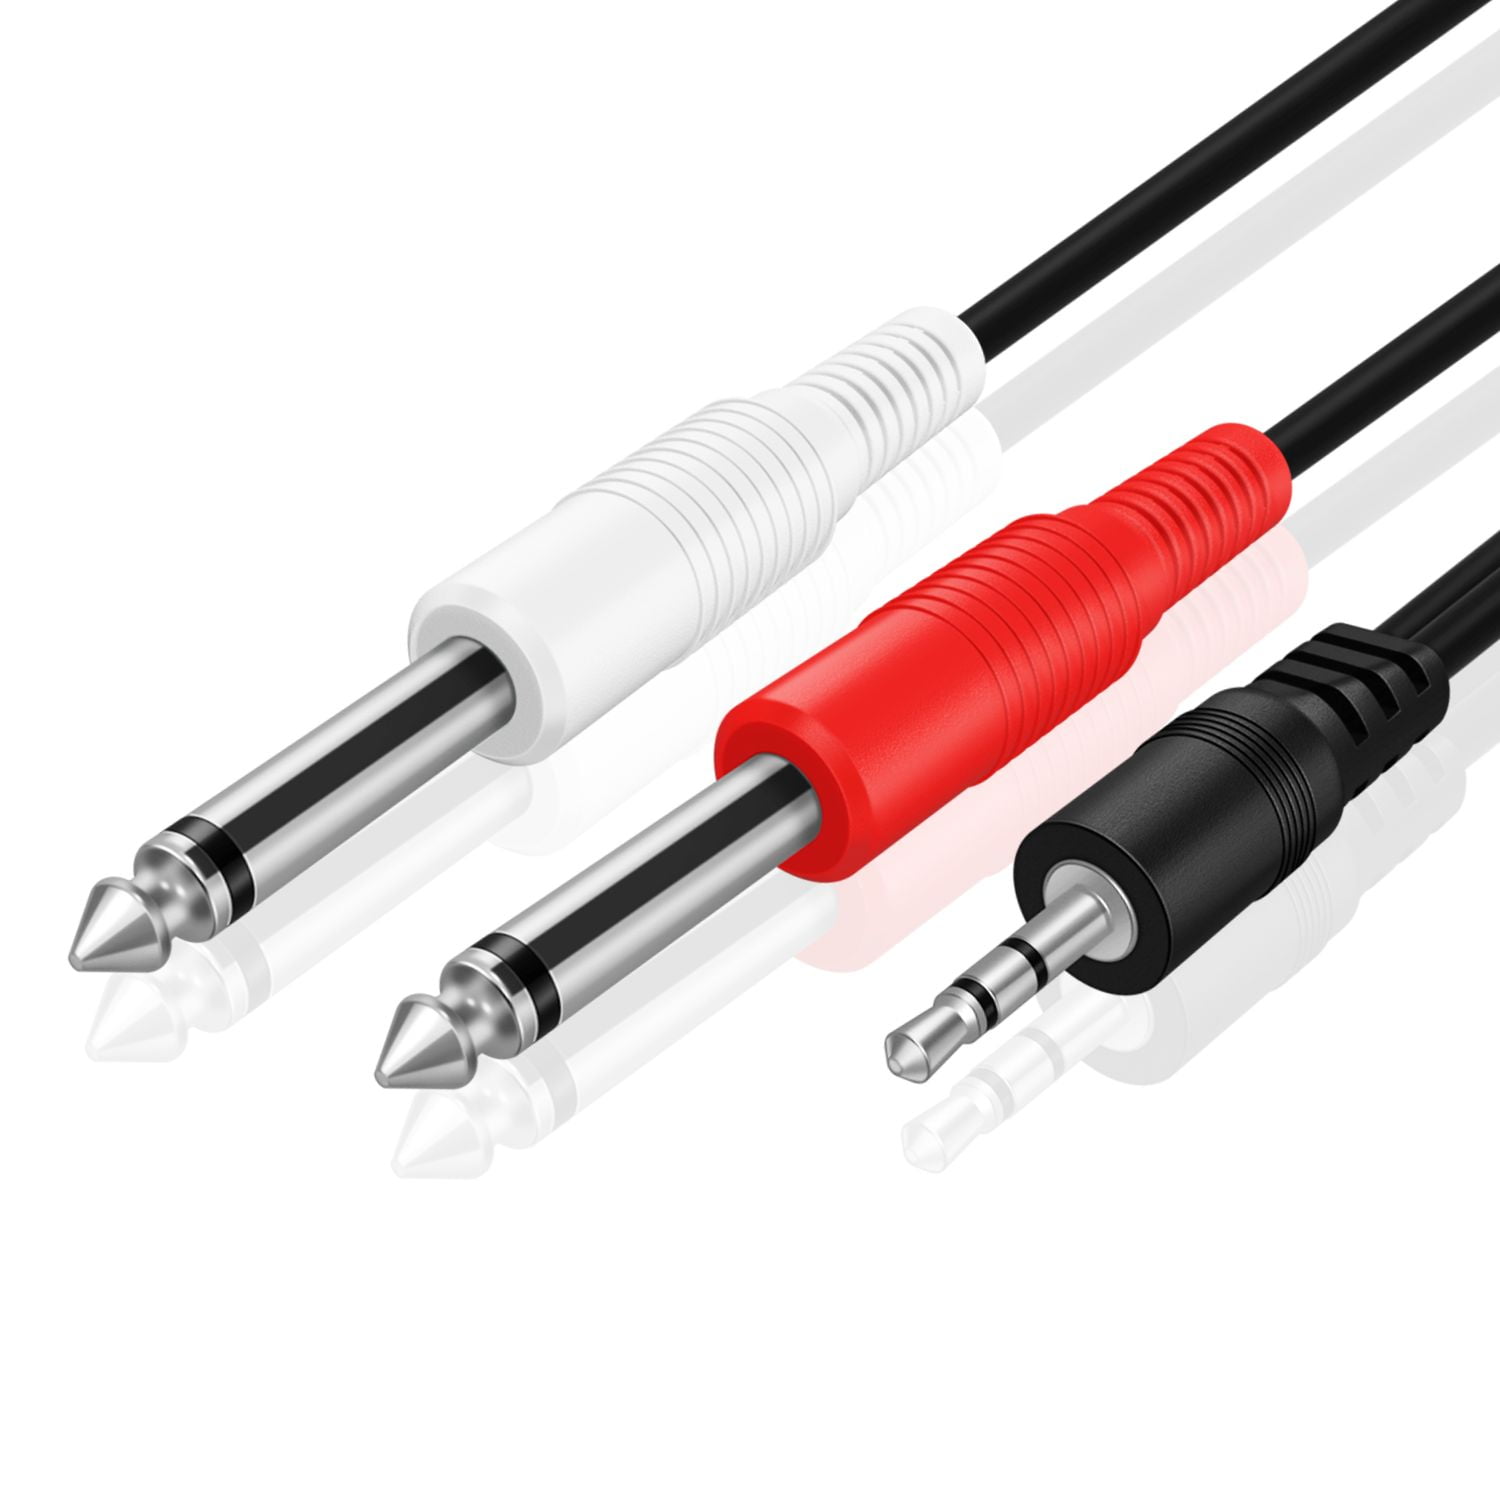 TNP Premium 1/4 Inch (6.35mm) TRS to Dual RCA Cable 3 Feet Balanced TRS  Cable 1/4 Inch to 2 RCA Y Splitter, Red and White Male RCA to 1/4 Adapter